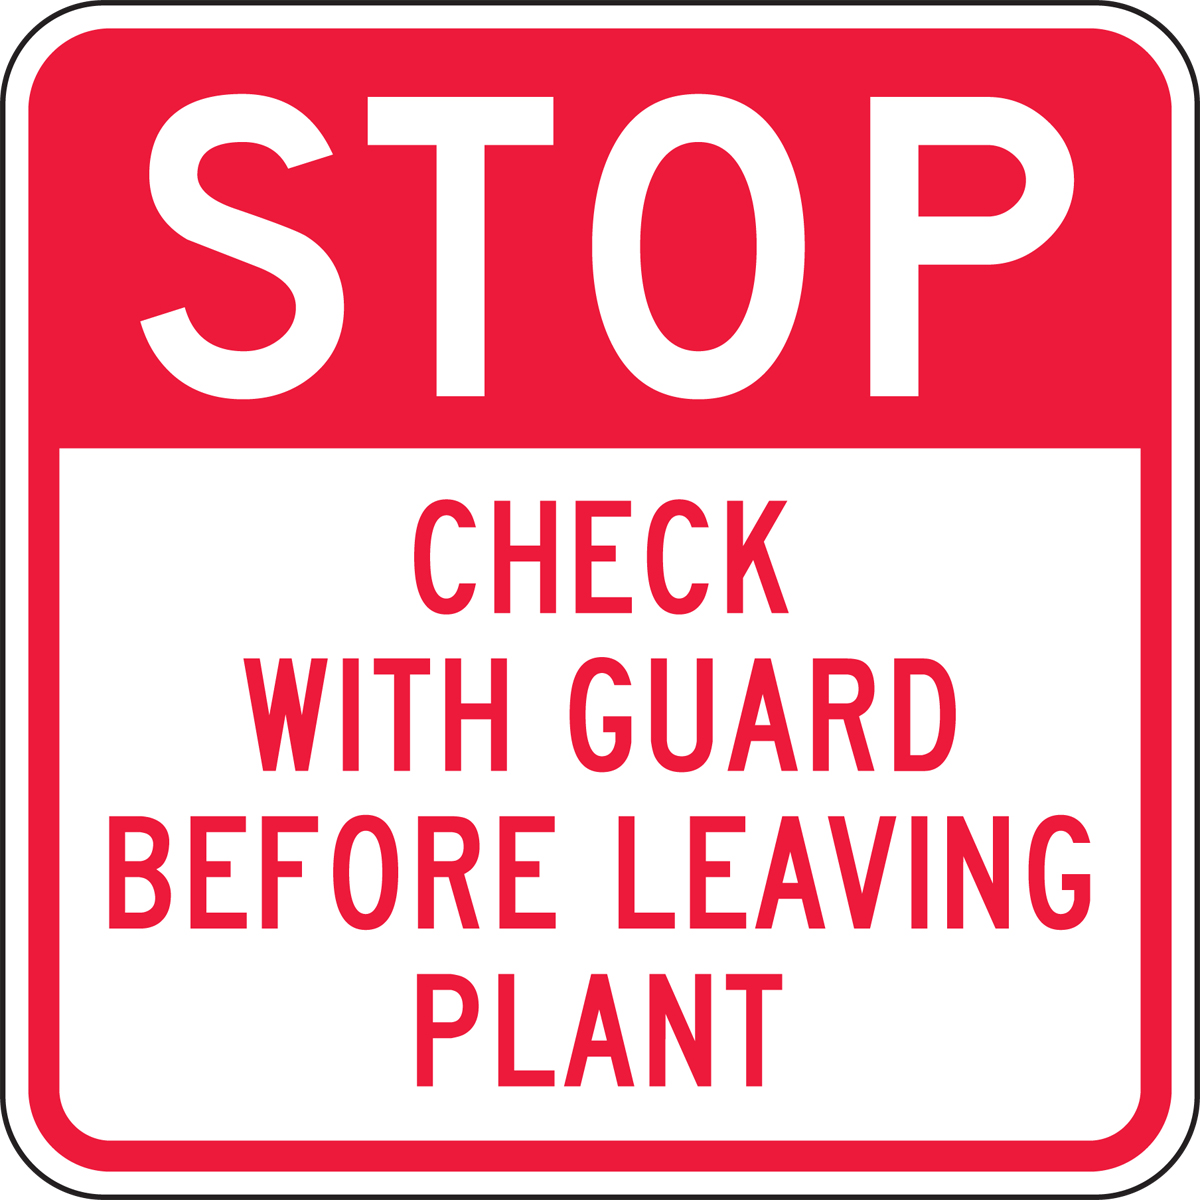 STOP CHECK WITH GUARD BEFORE LEAVING PLANT